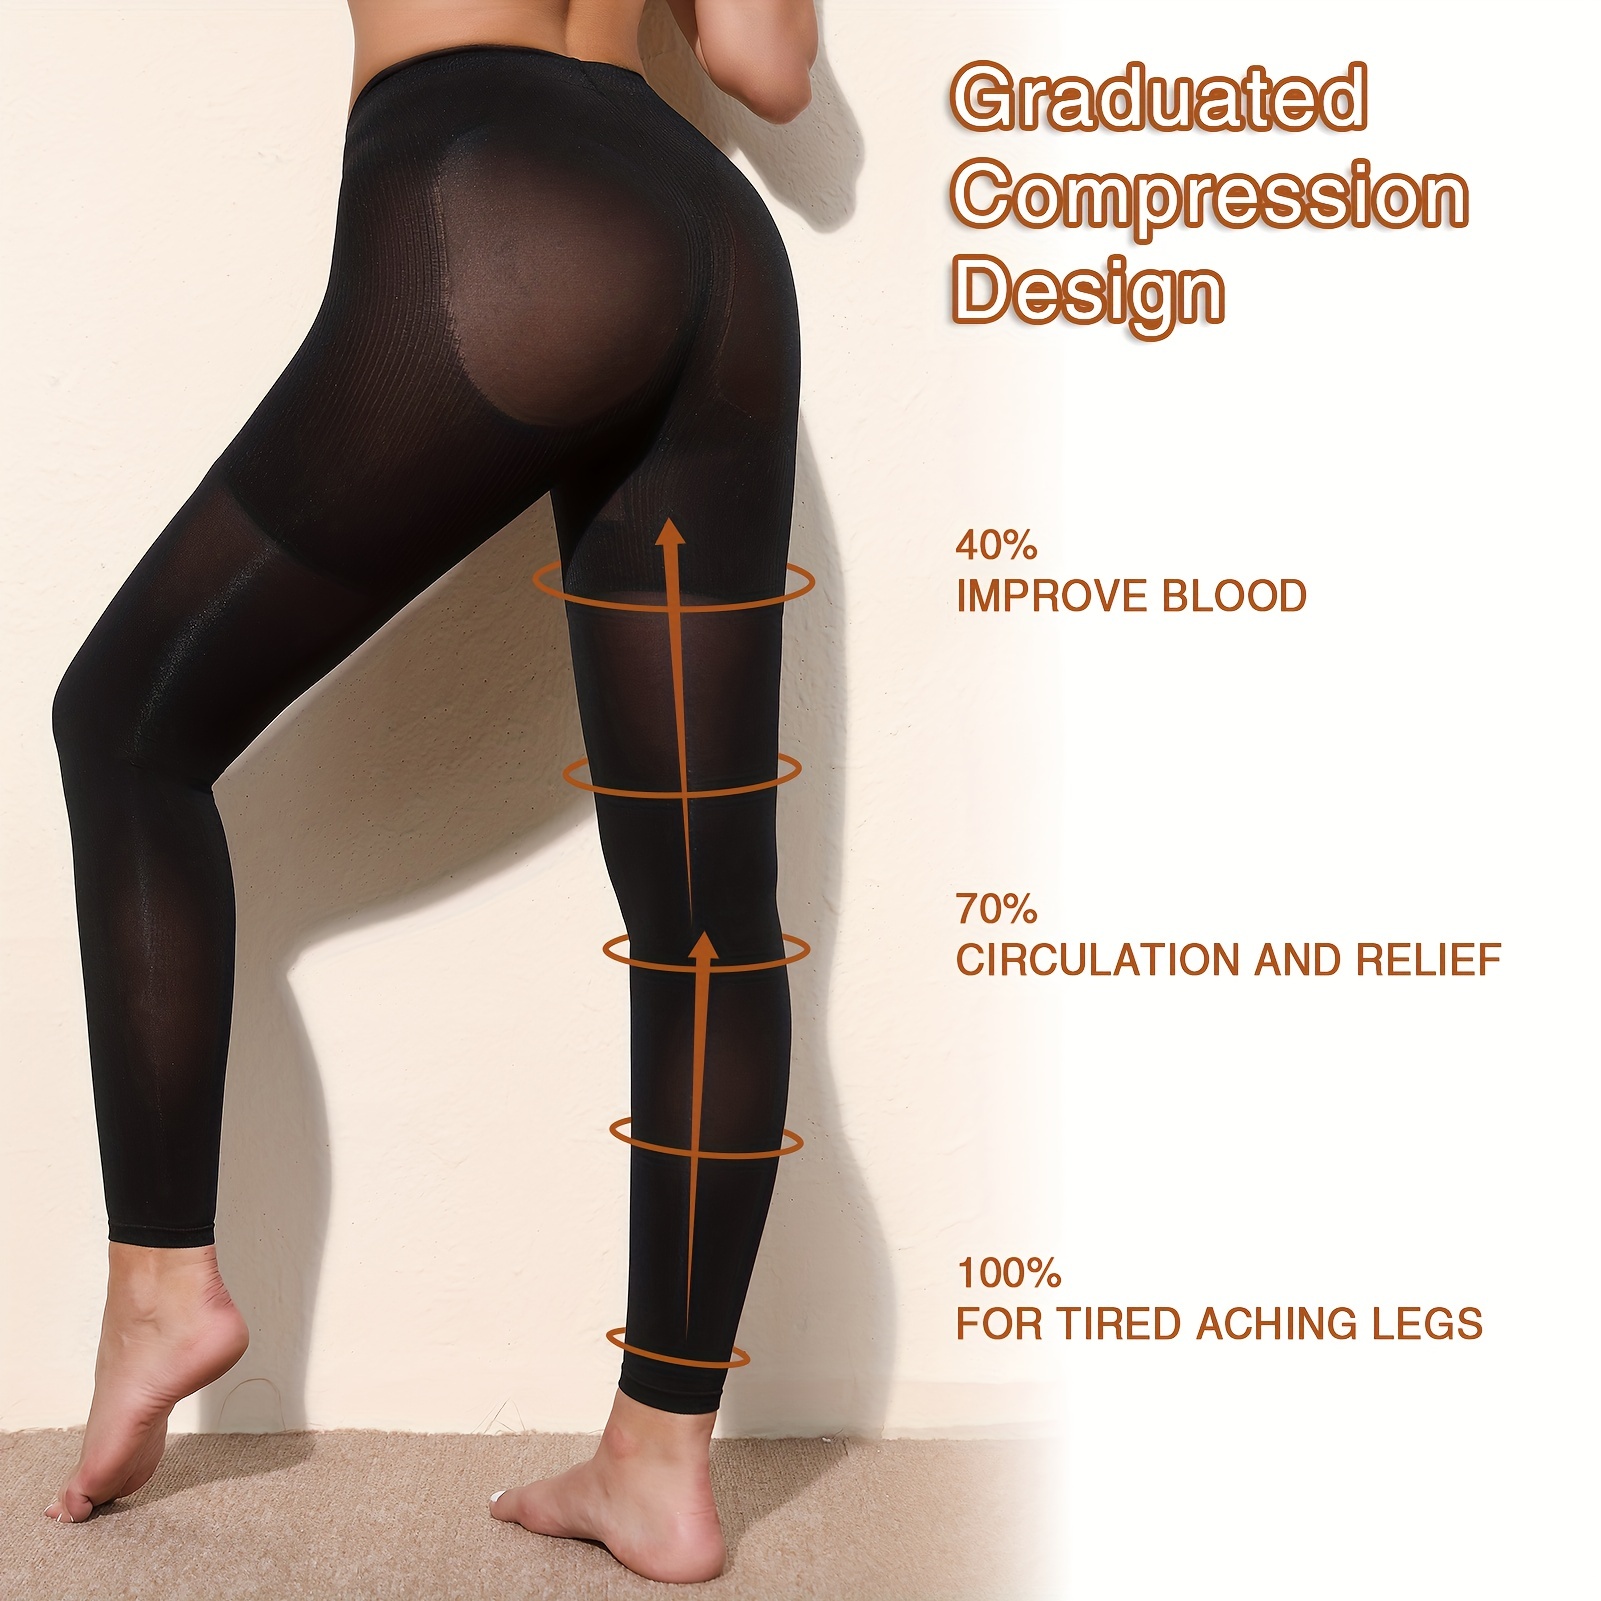 1 Pairs Medical Compression Pantyhose For Women Support 20-30 MmHg  Treatment Swelling, Edema Varicose Veins Waist High Compression Stockings